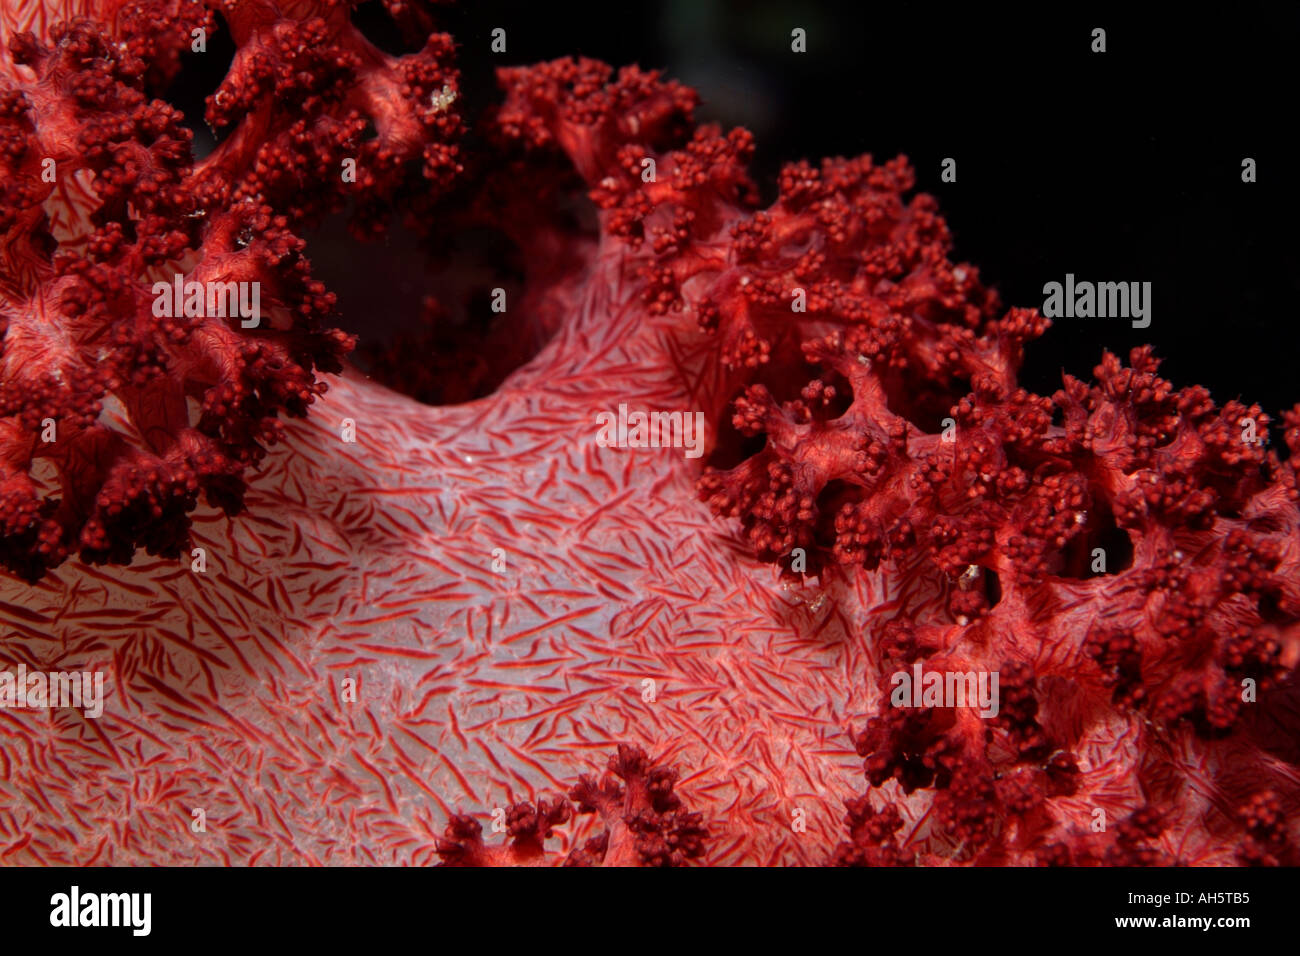 Red spiky soft coral (Dendronephthya), Bocifushi Wreck, South Male Atoll, Maldives. Stock Photo